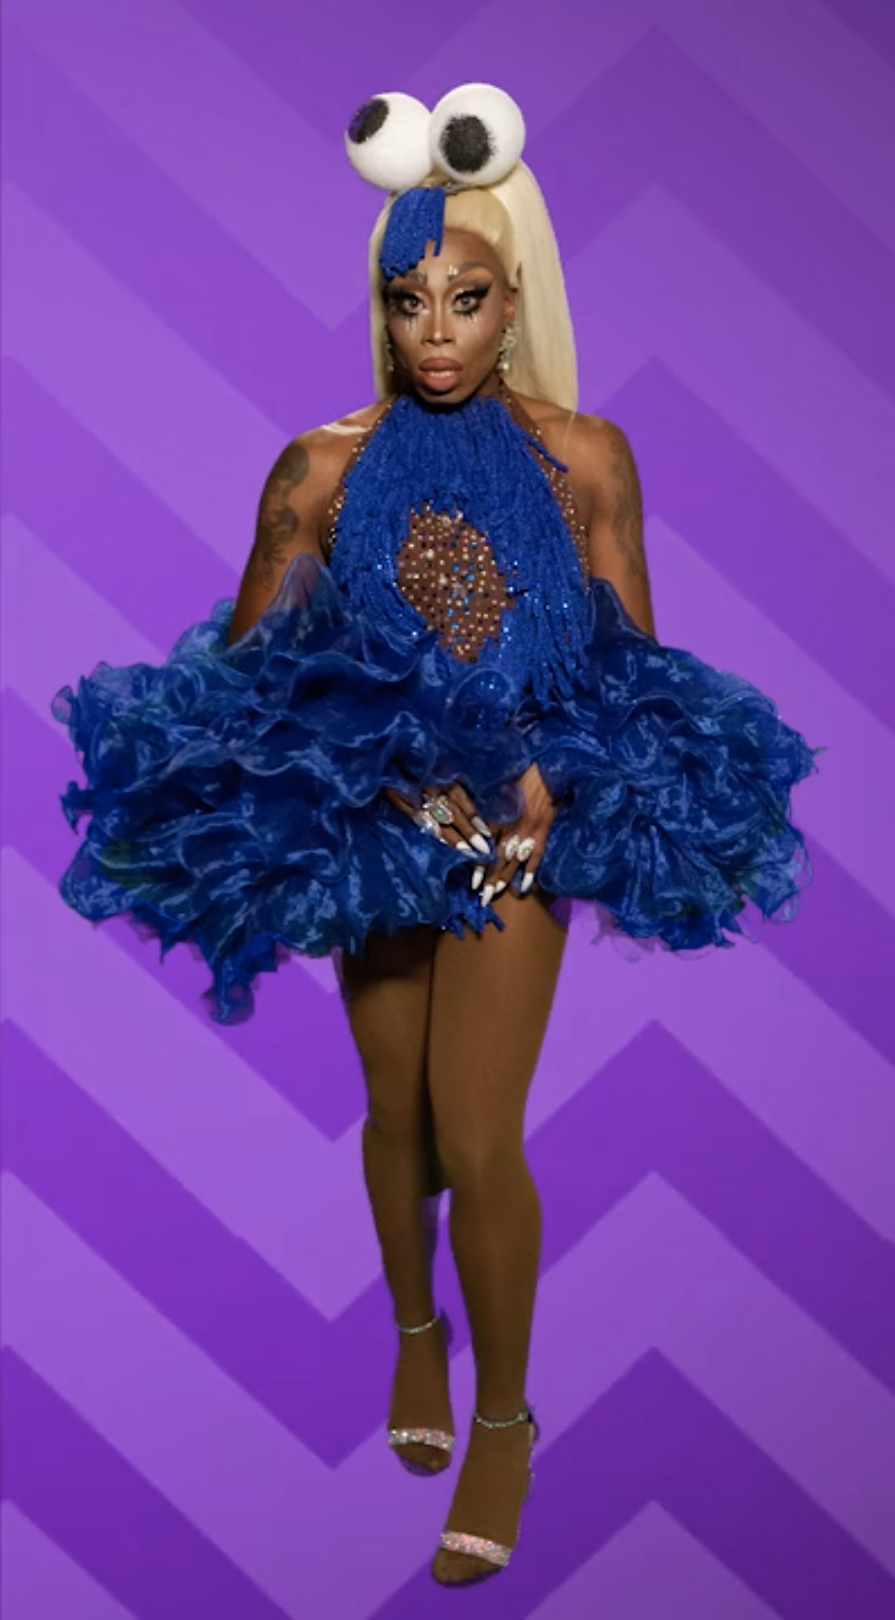 Image Monique Best Dragpng Rupauls Drag Race Wiki Fandom Powered By Wikia